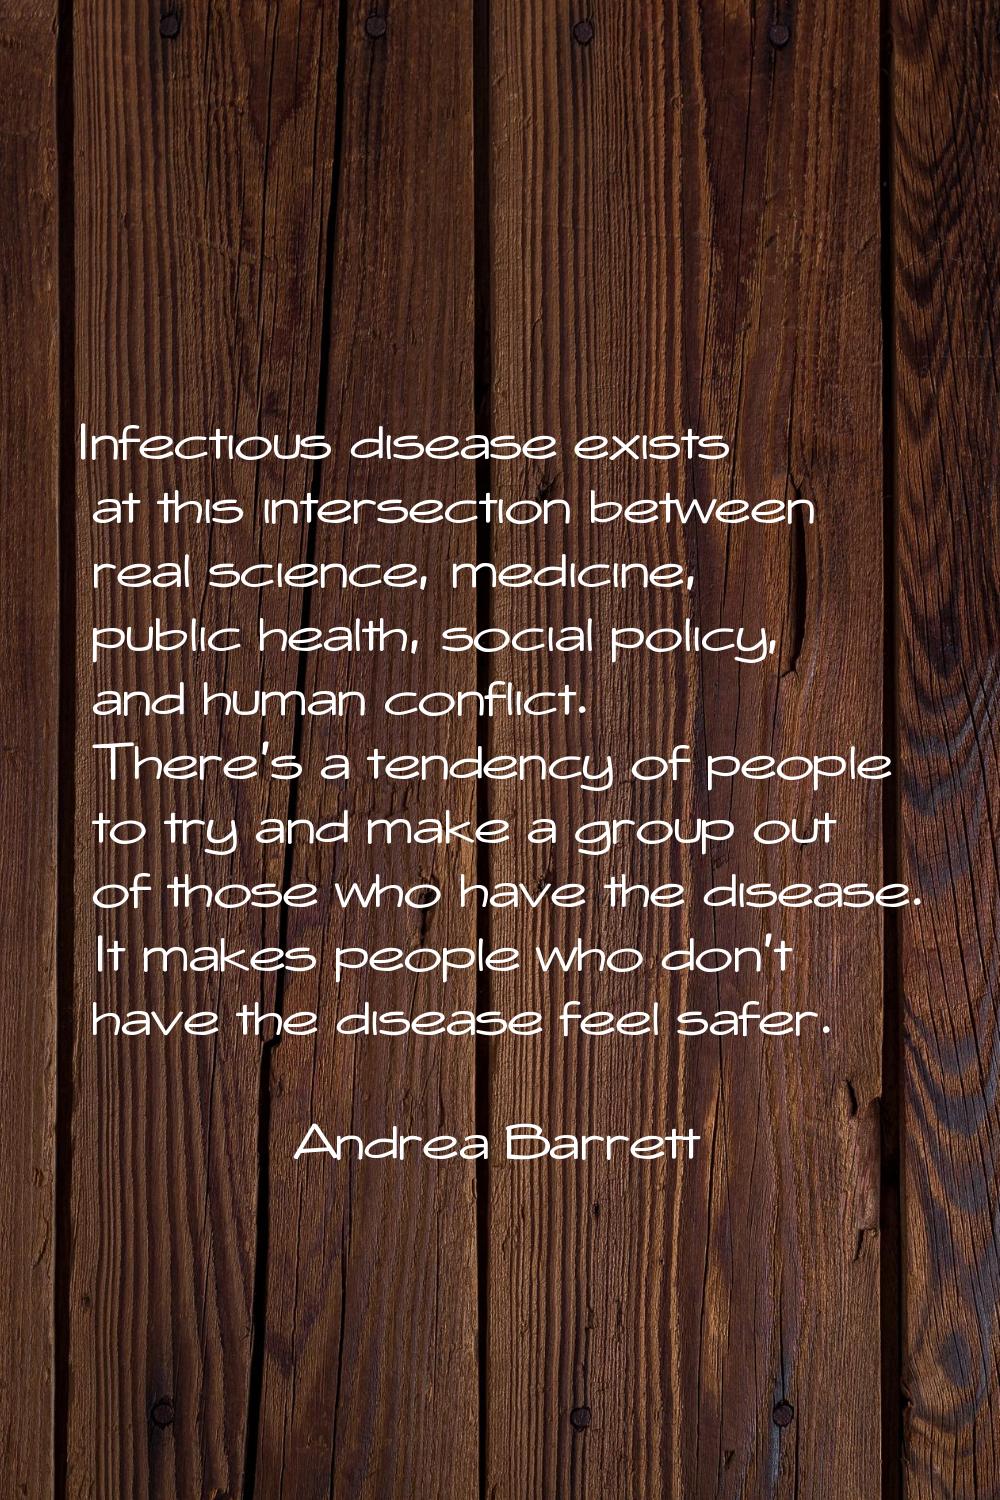 Infectious disease exists at this intersection between real science, medicine, public health, socia